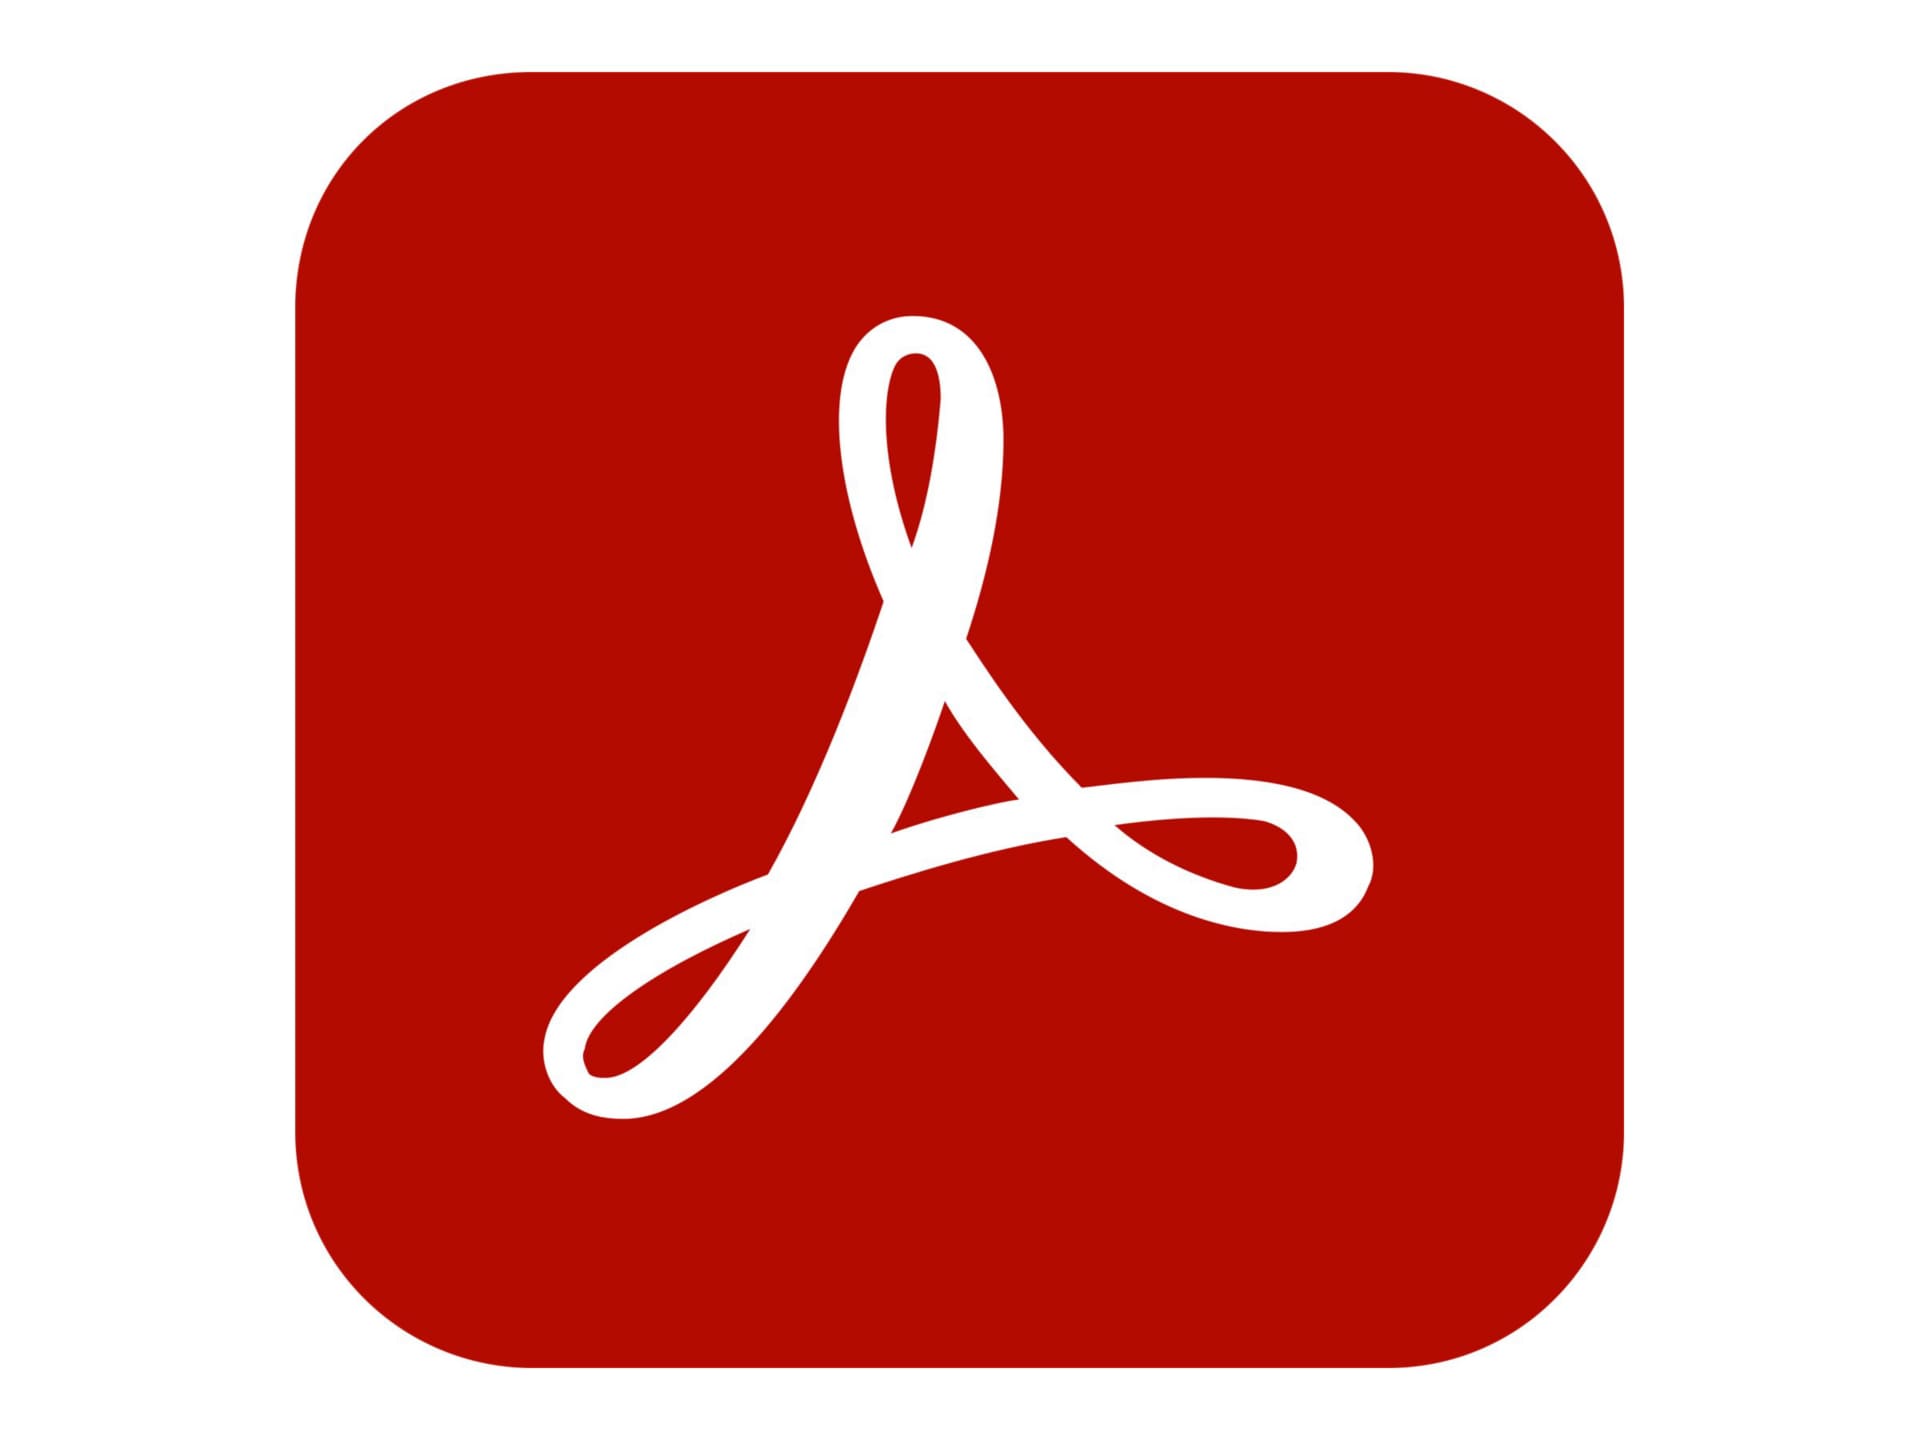 Adobe Acrobat Pro DC for Teams - Subscription New (6 months) - 1 user